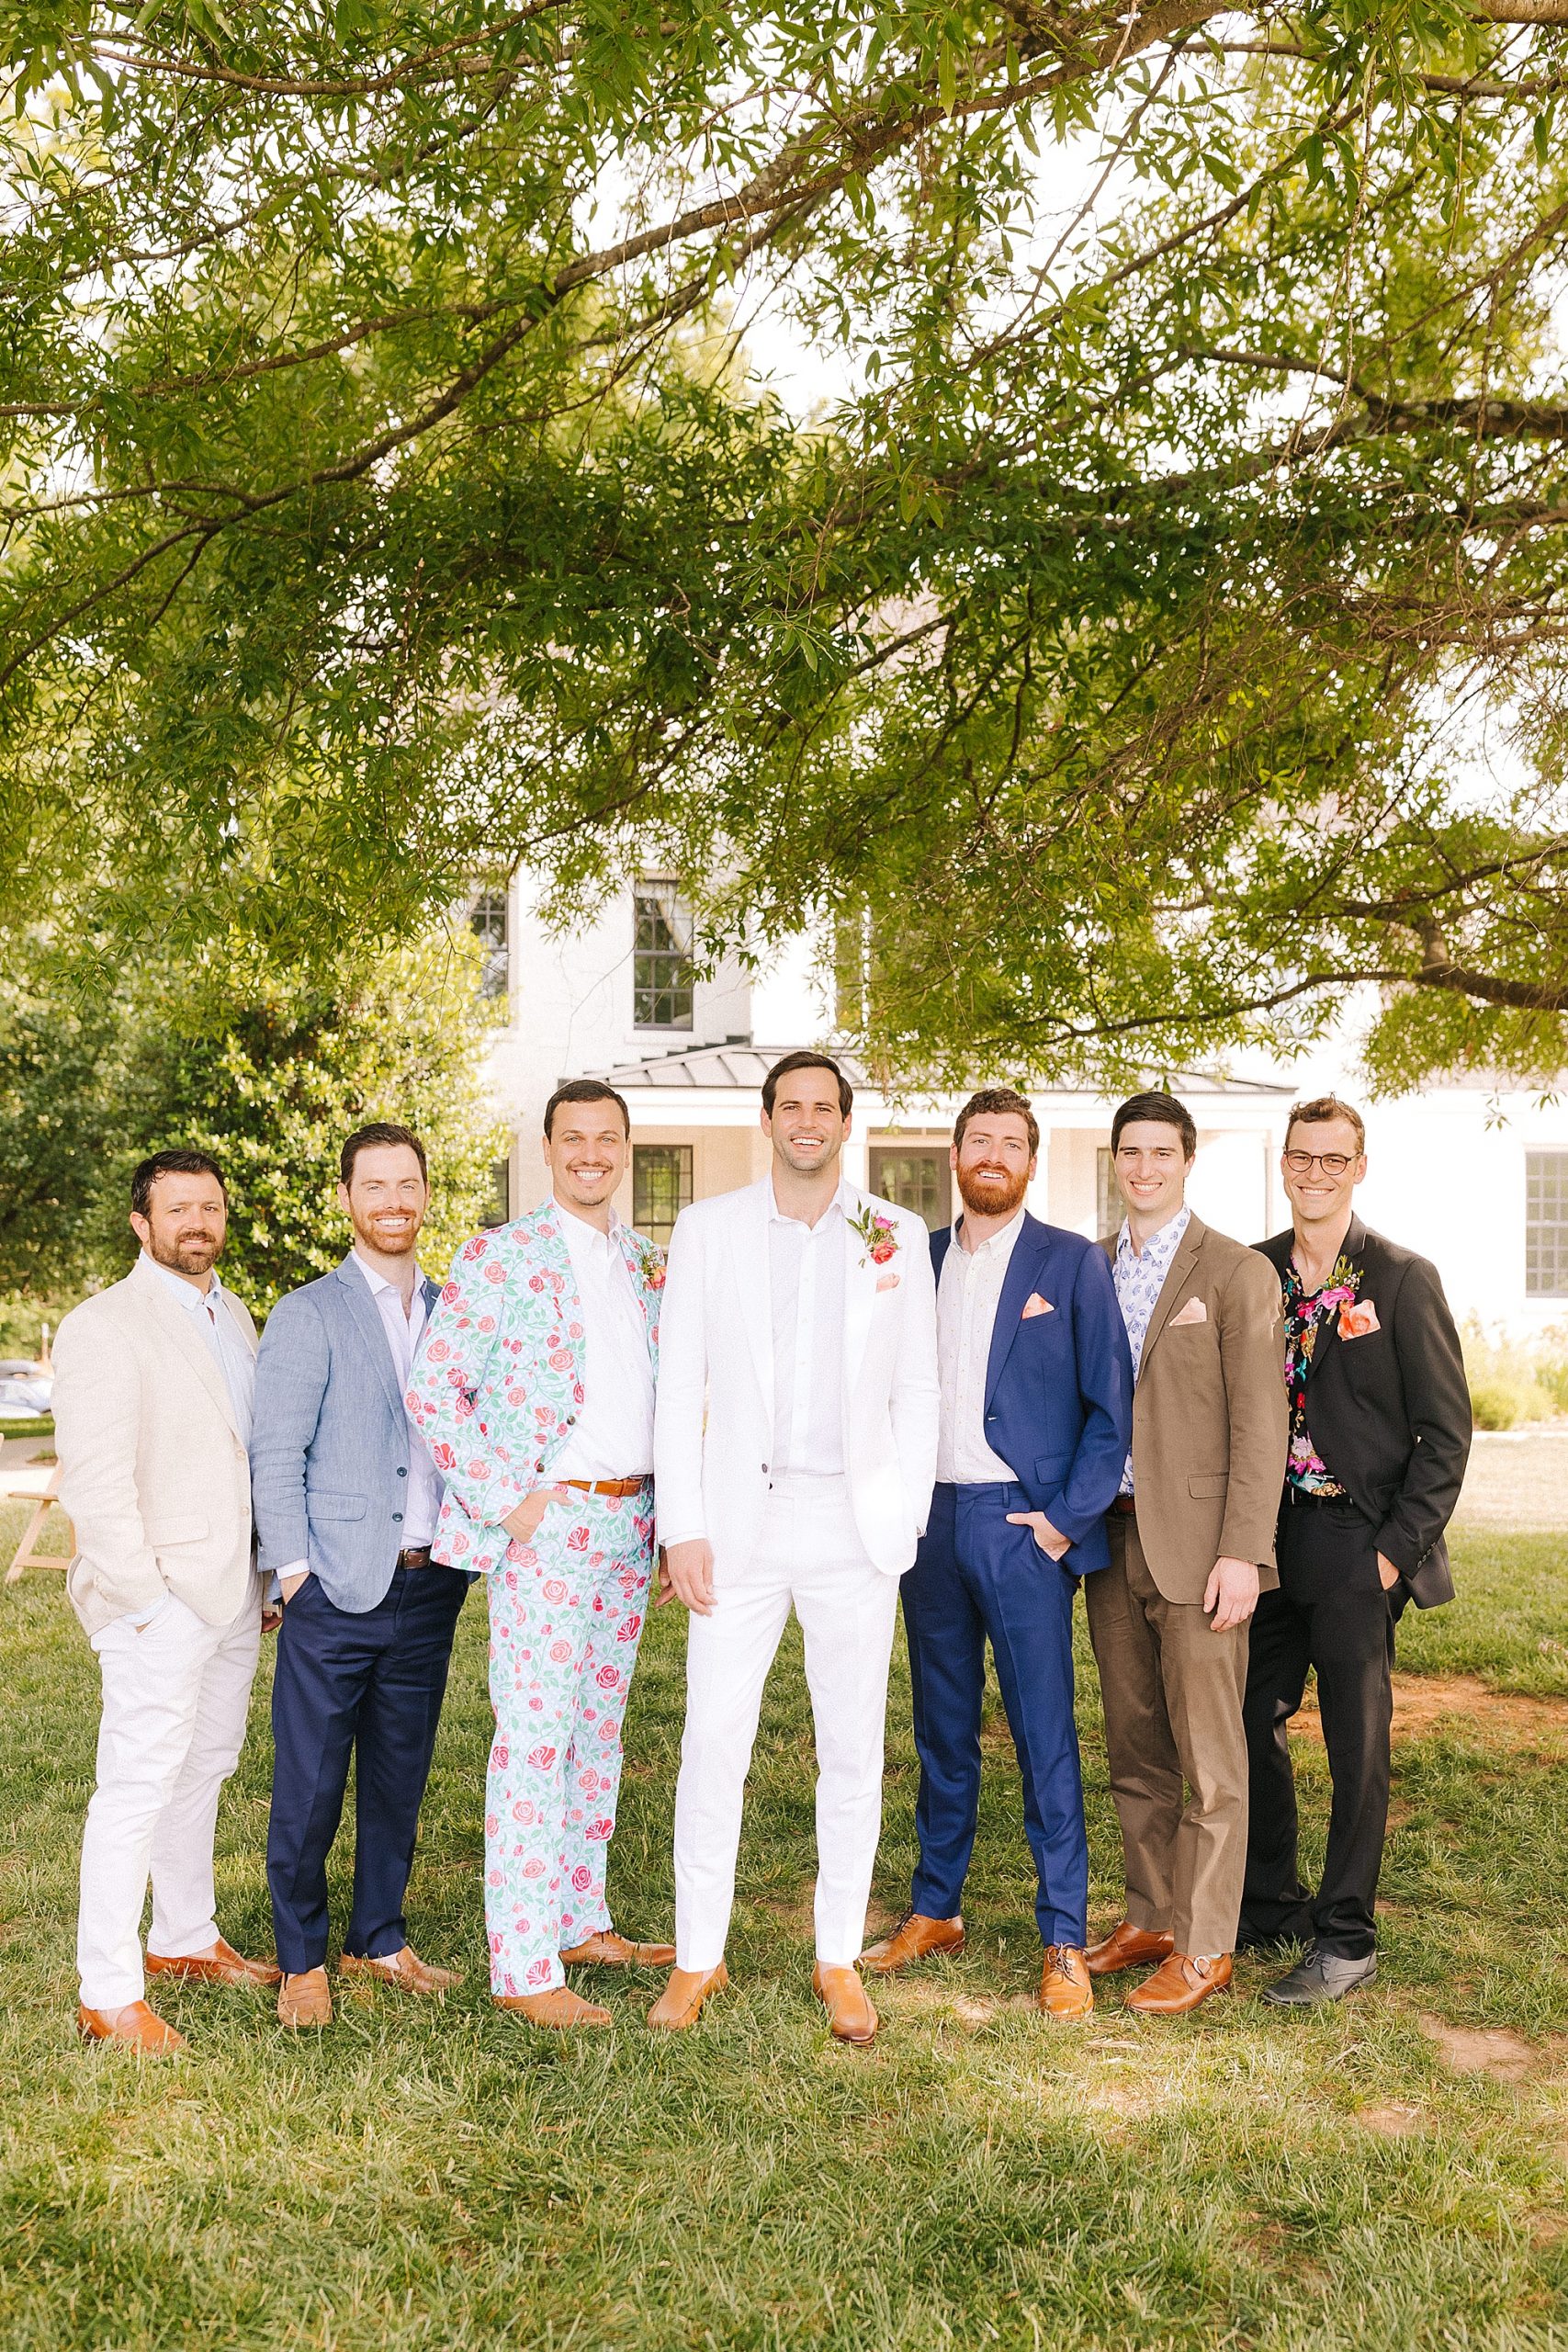 groom poses with groomsmen in mismatched suits